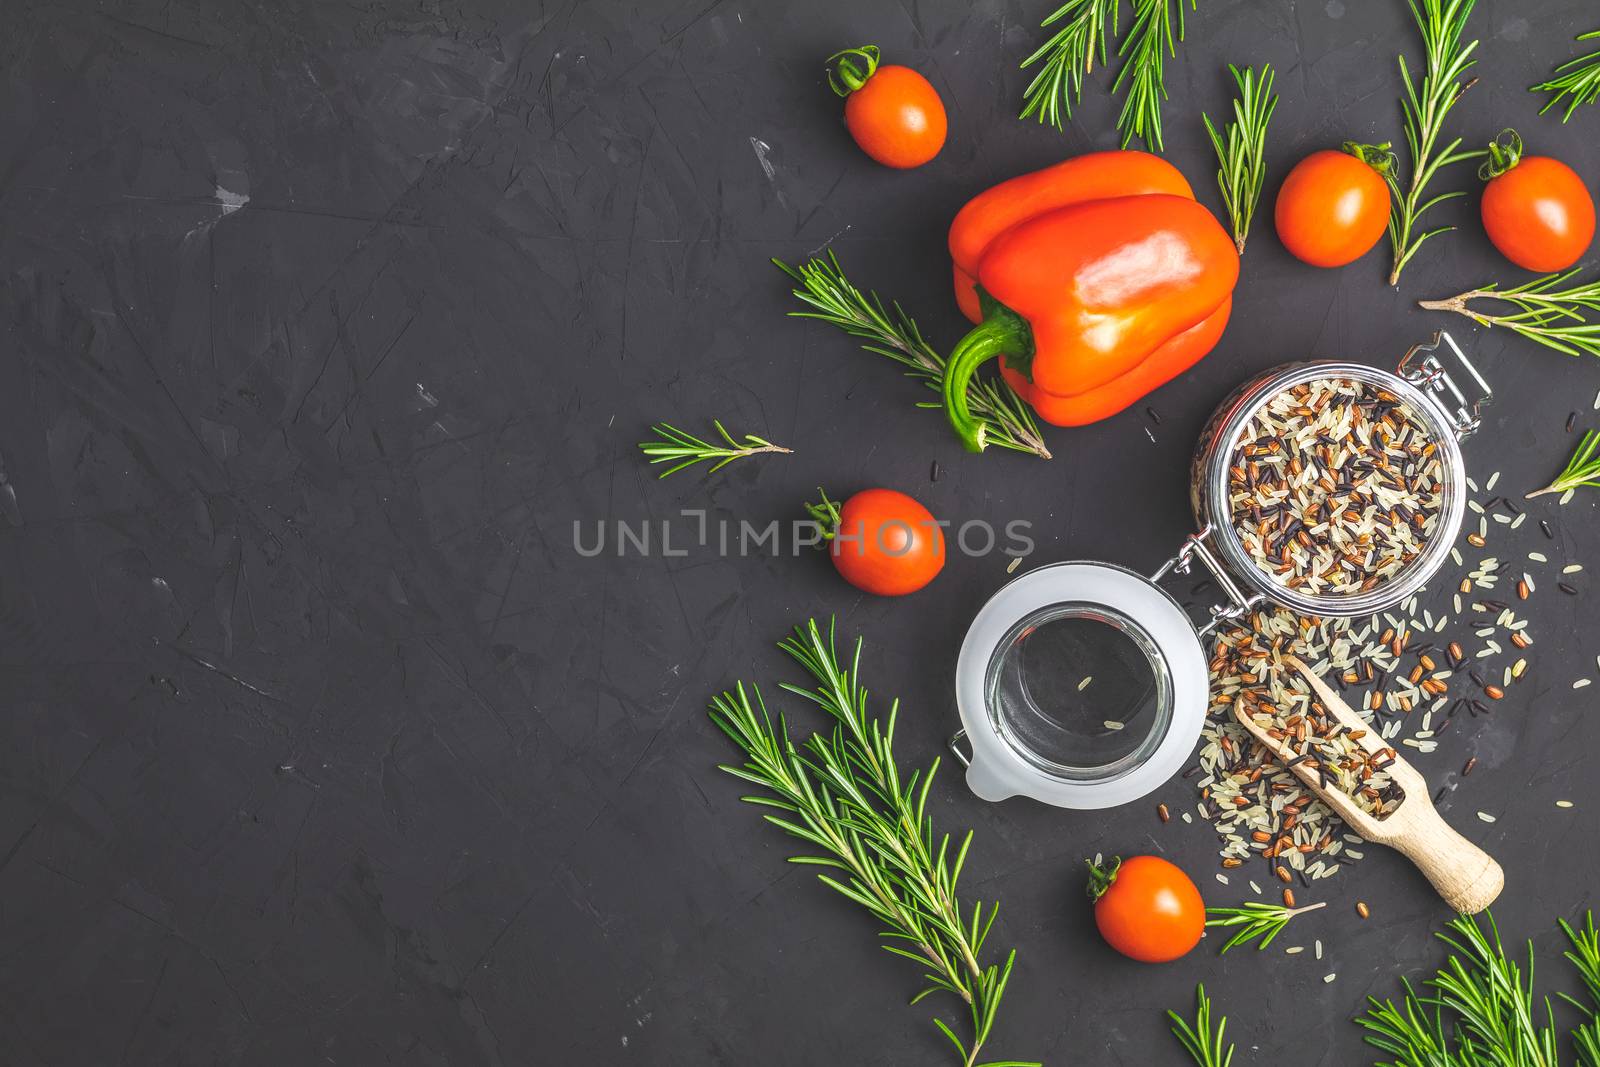 Mix rise with vegetables and herb on black concrete surface by ArtSvitlyna